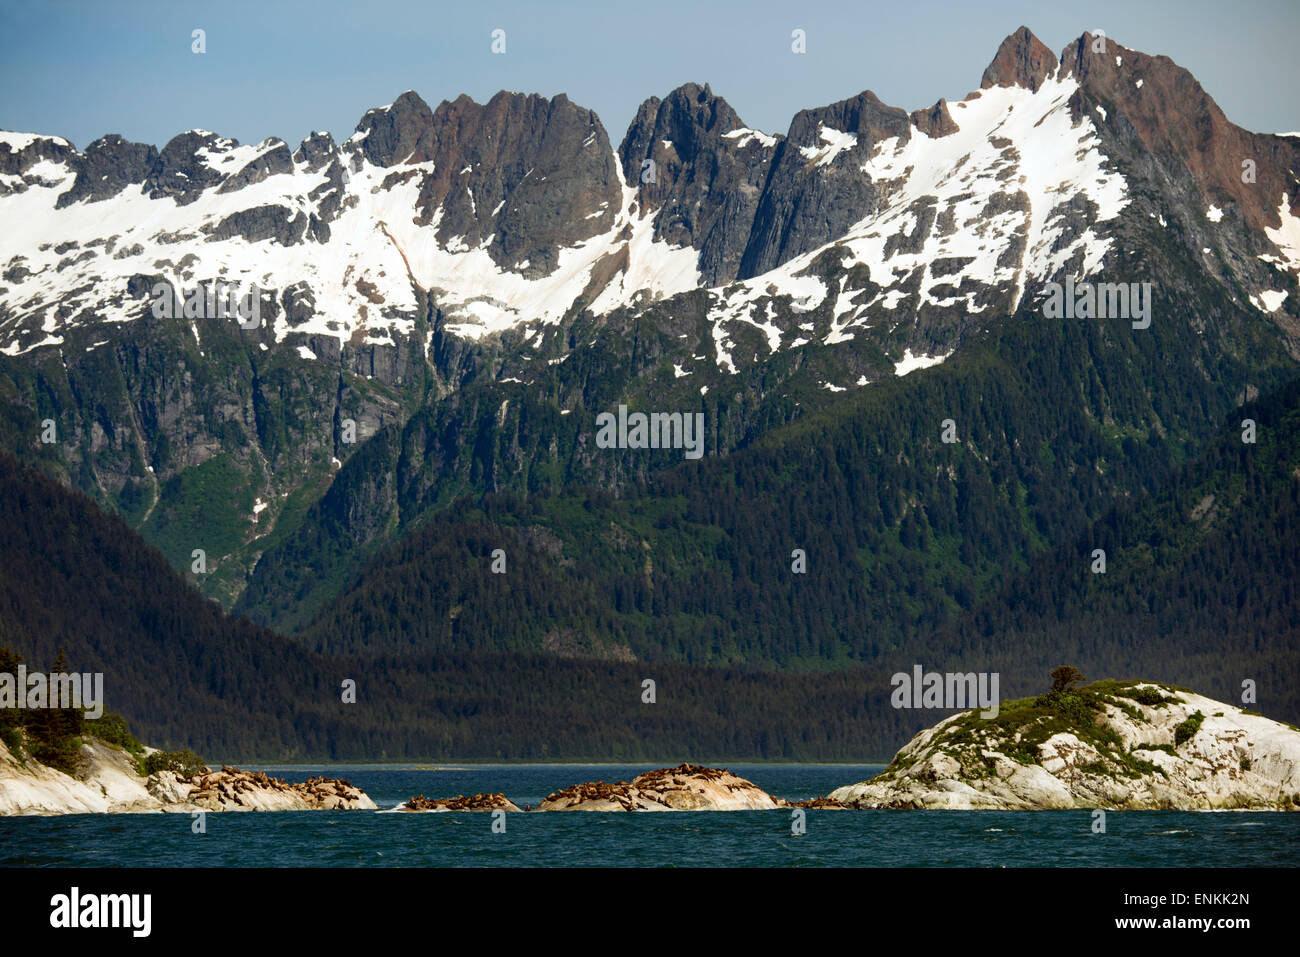 A colony of Steller Sea Lions (Eumetopias jubatus) on South Marble Island in Glacier Bay National Park, Alaska. USA. Northern (S Stock Photo